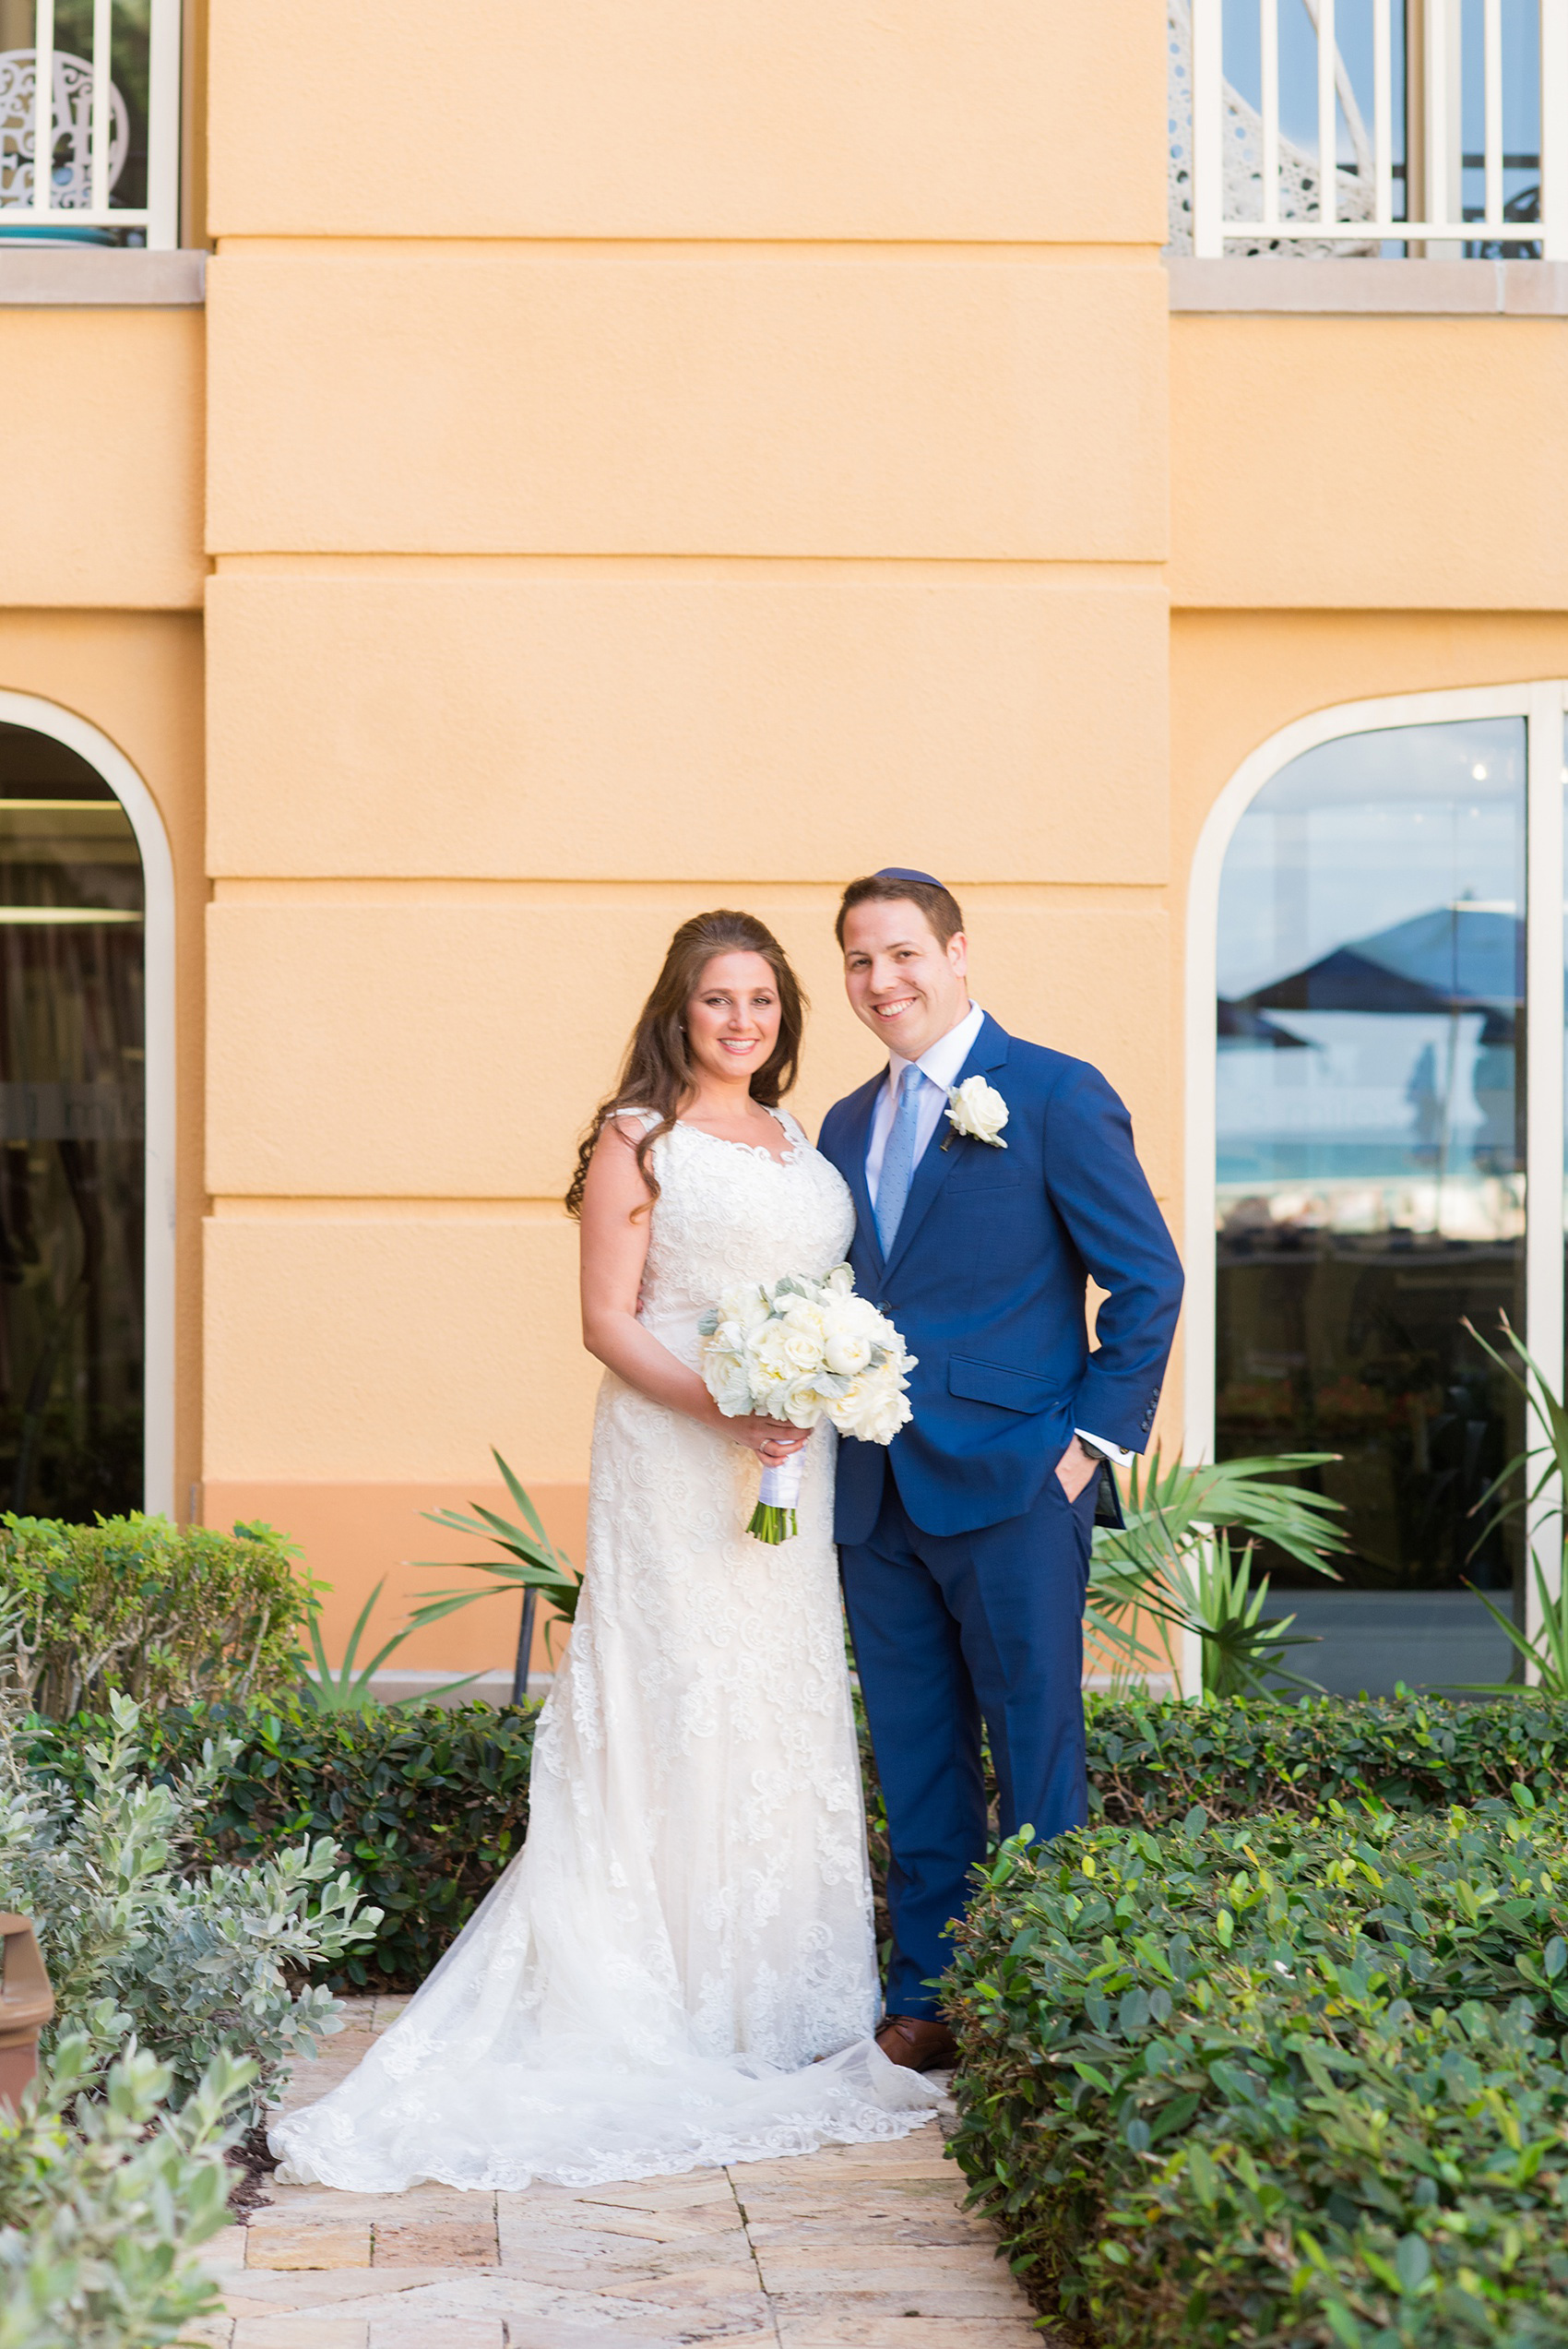 Eau Palm Beach wedding photos by Mikkel Paige Photography. This luxury Florida hotel is a beautiful location for a destination wedding. The bride and groom took pictures around the resort before their ceremony. Click through to see more! #WestPalmBeach #EauPalmBeach #BeachWedding #FloridaWeddings #BeachBride 